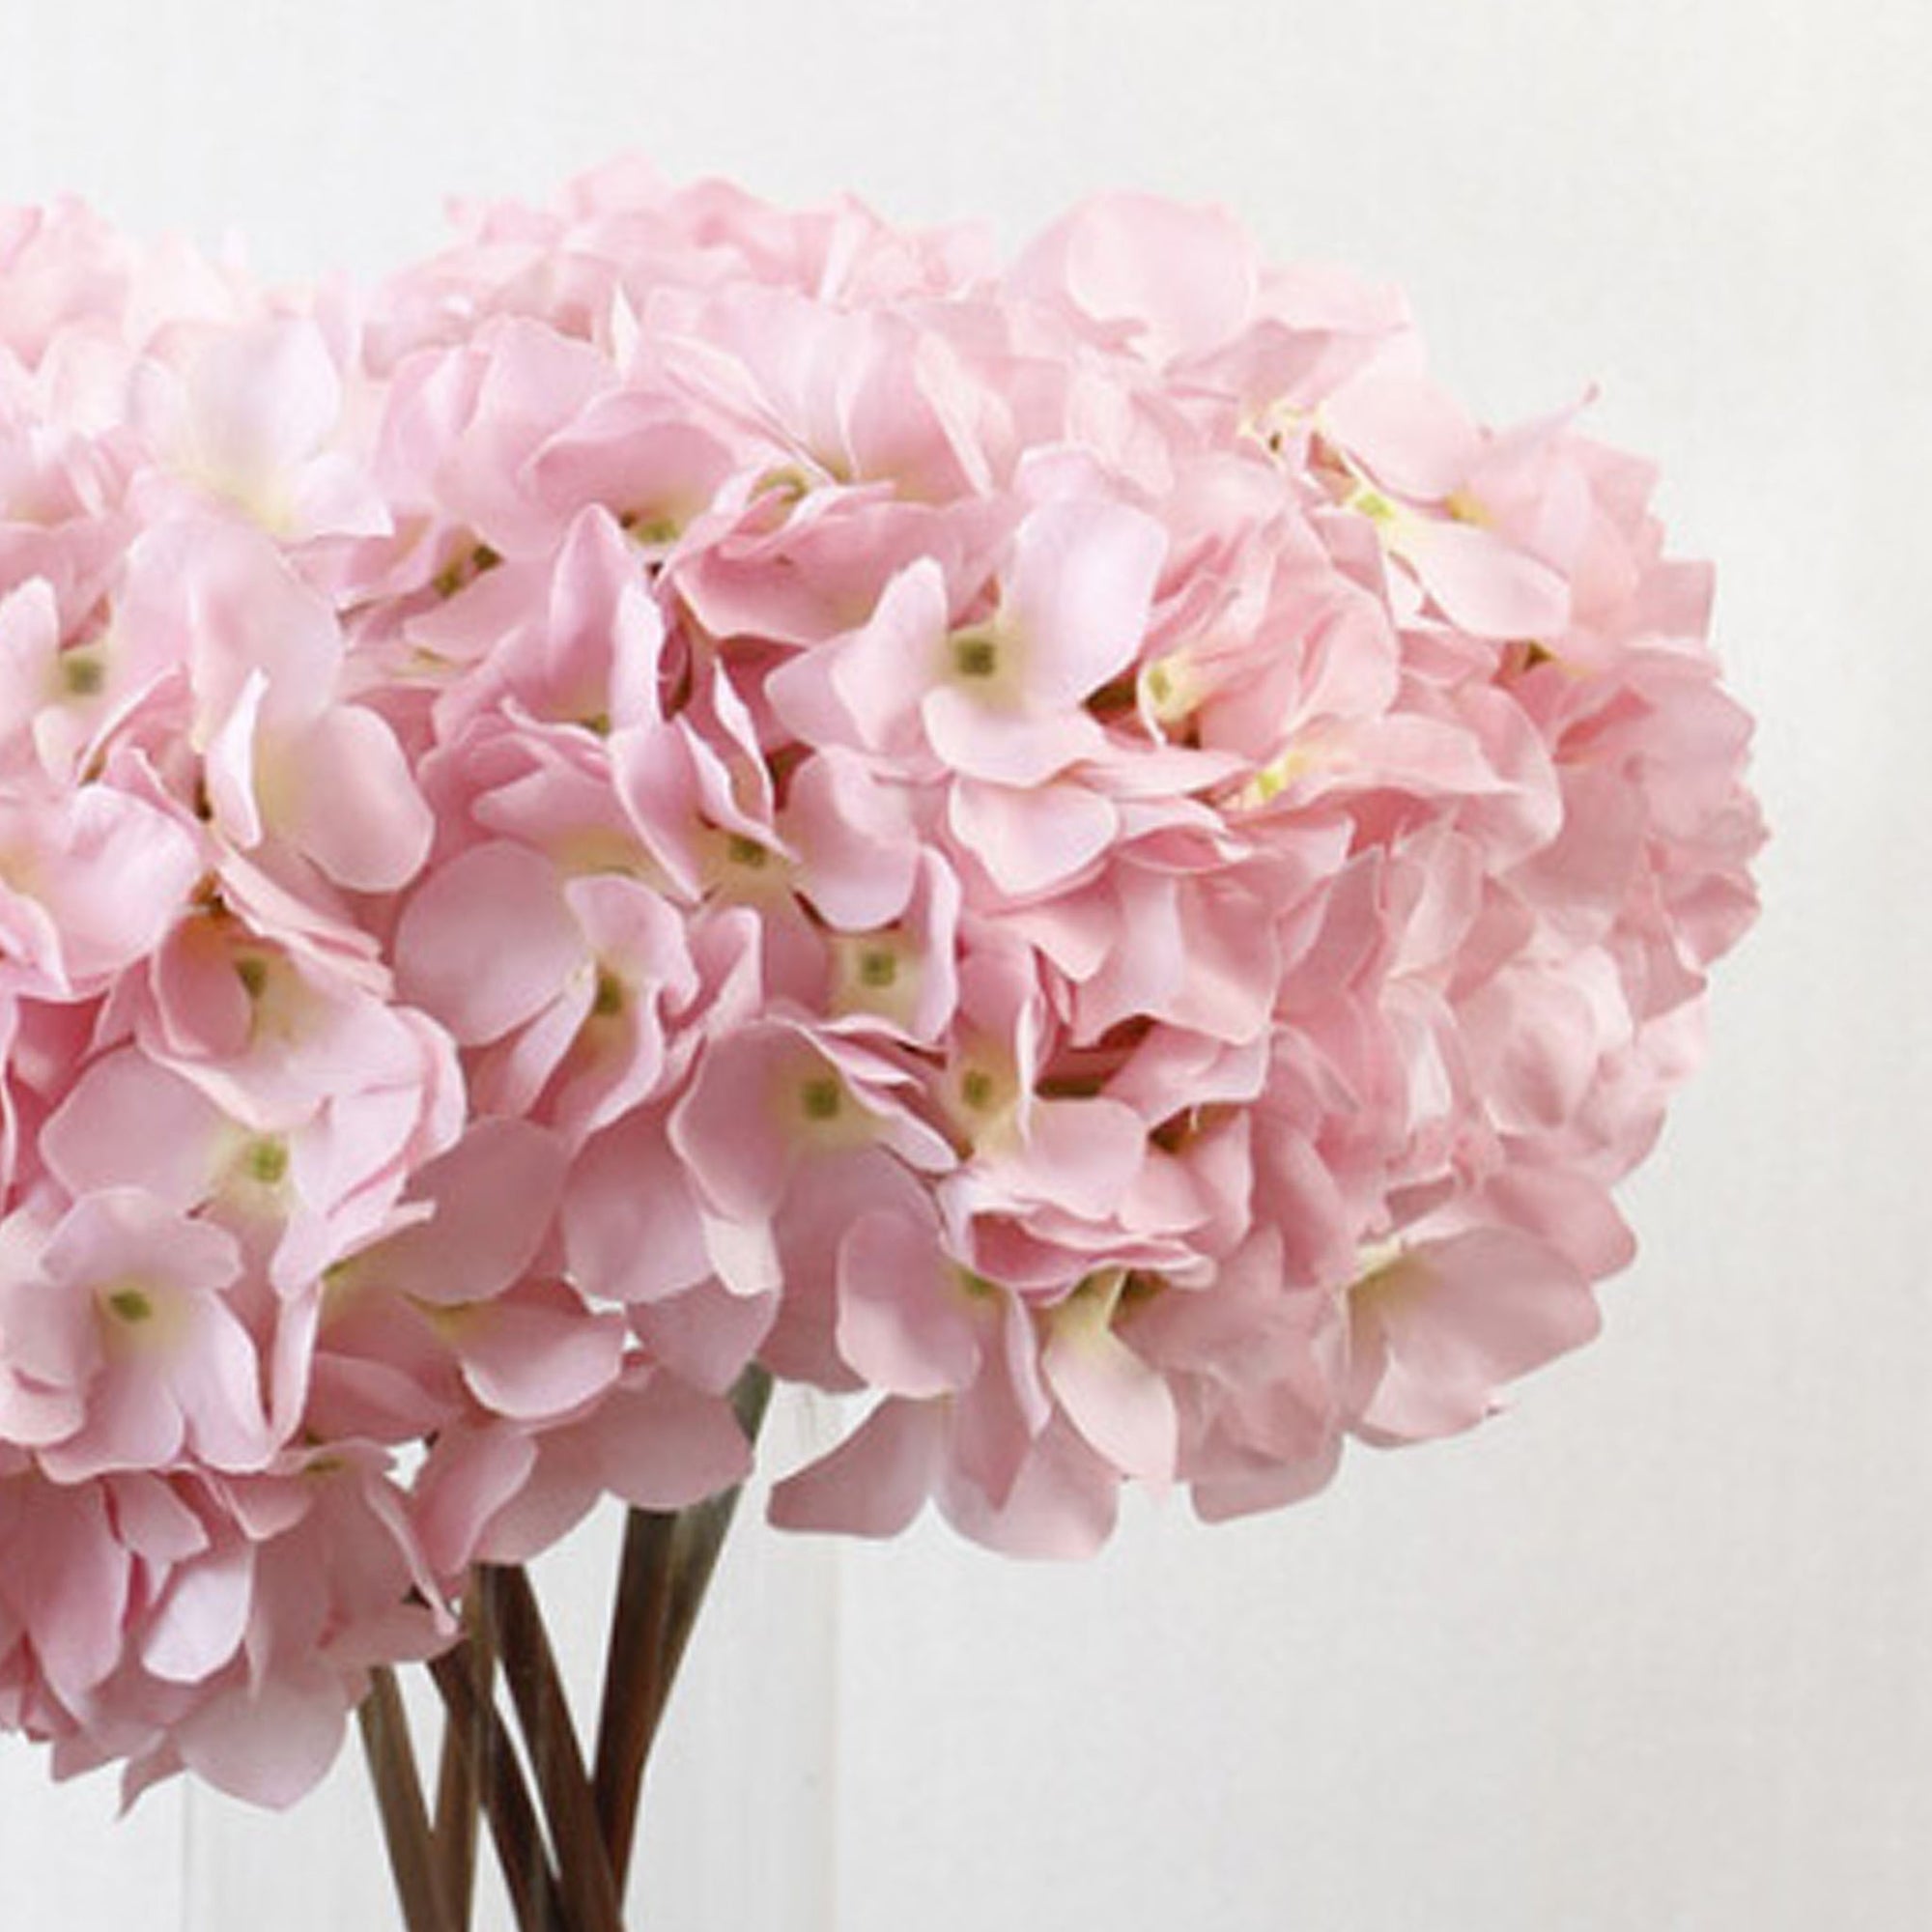 Large Head Hydrangea Simulation Fake Flowers for Home Party Wedding Decoration